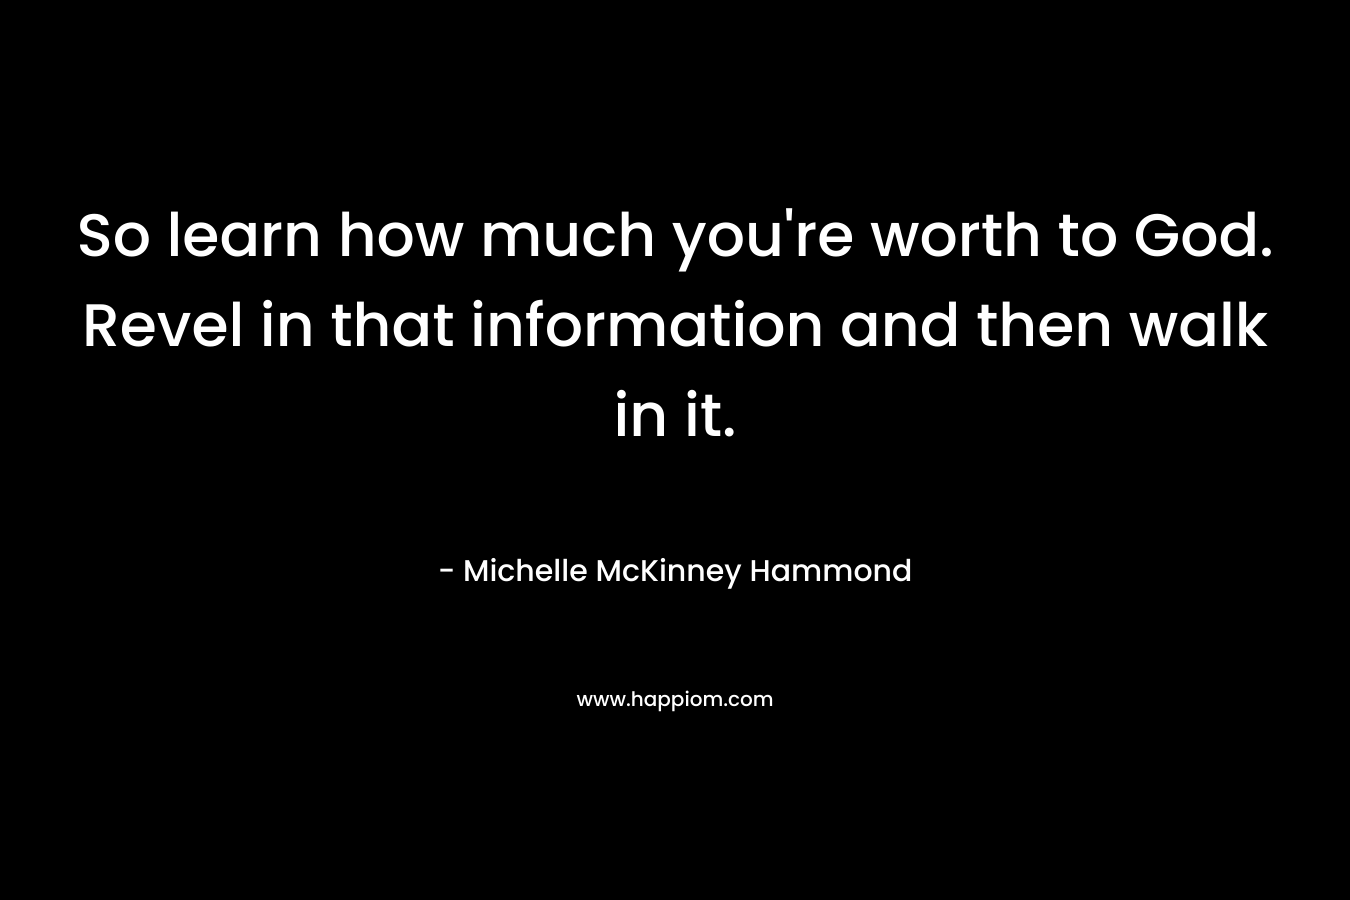 So learn how much you're worth to God. Revel in that information and then walk in it.